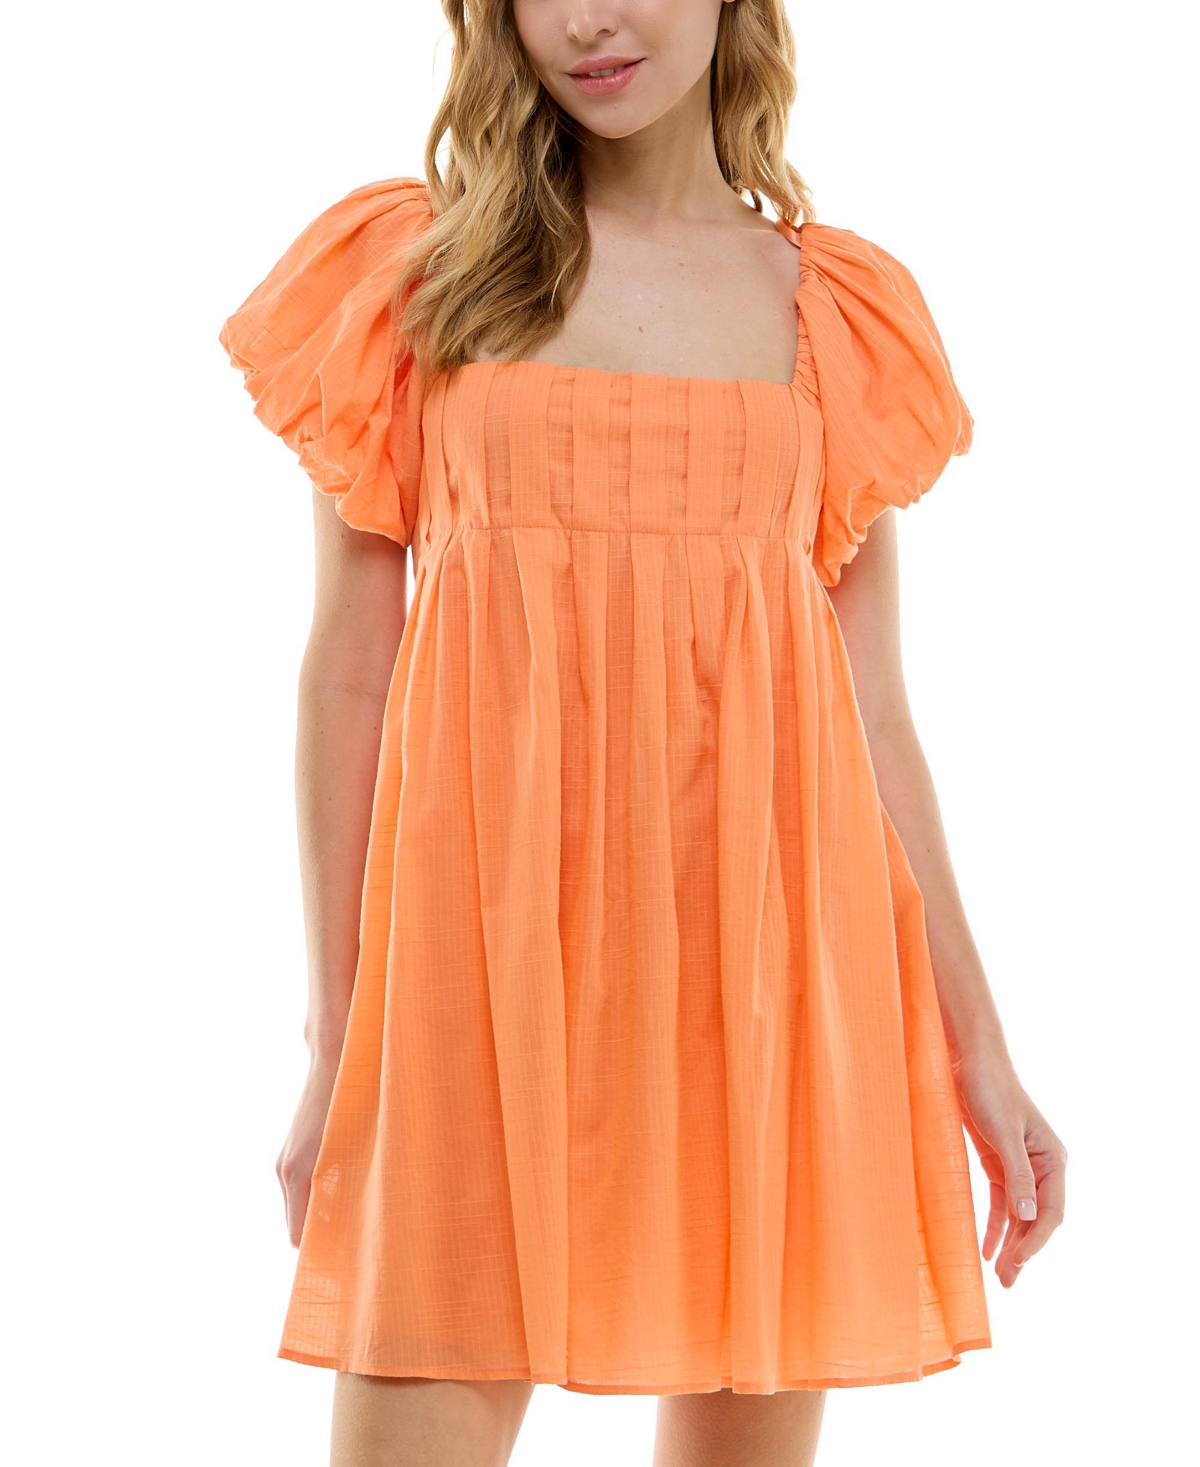 Juniors' Square-Neck Puff-Sleeve Strappy-Back Dress - Cantaloupe